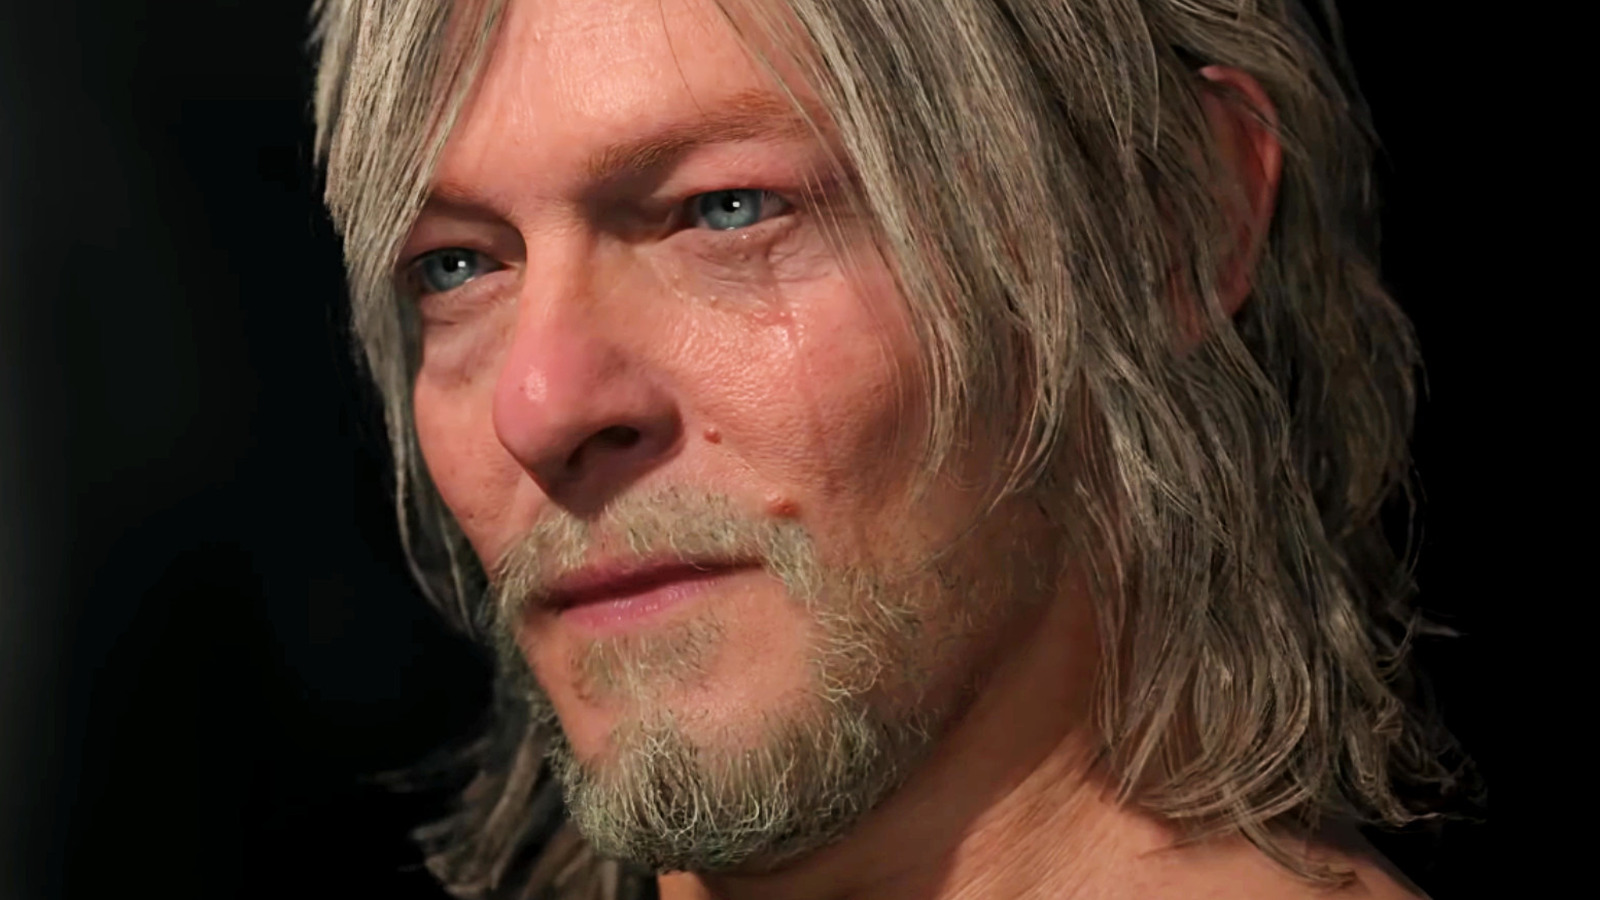 Death Stranding Game Trailer and Release Date Revealed - Death Stranding  Plot Questions